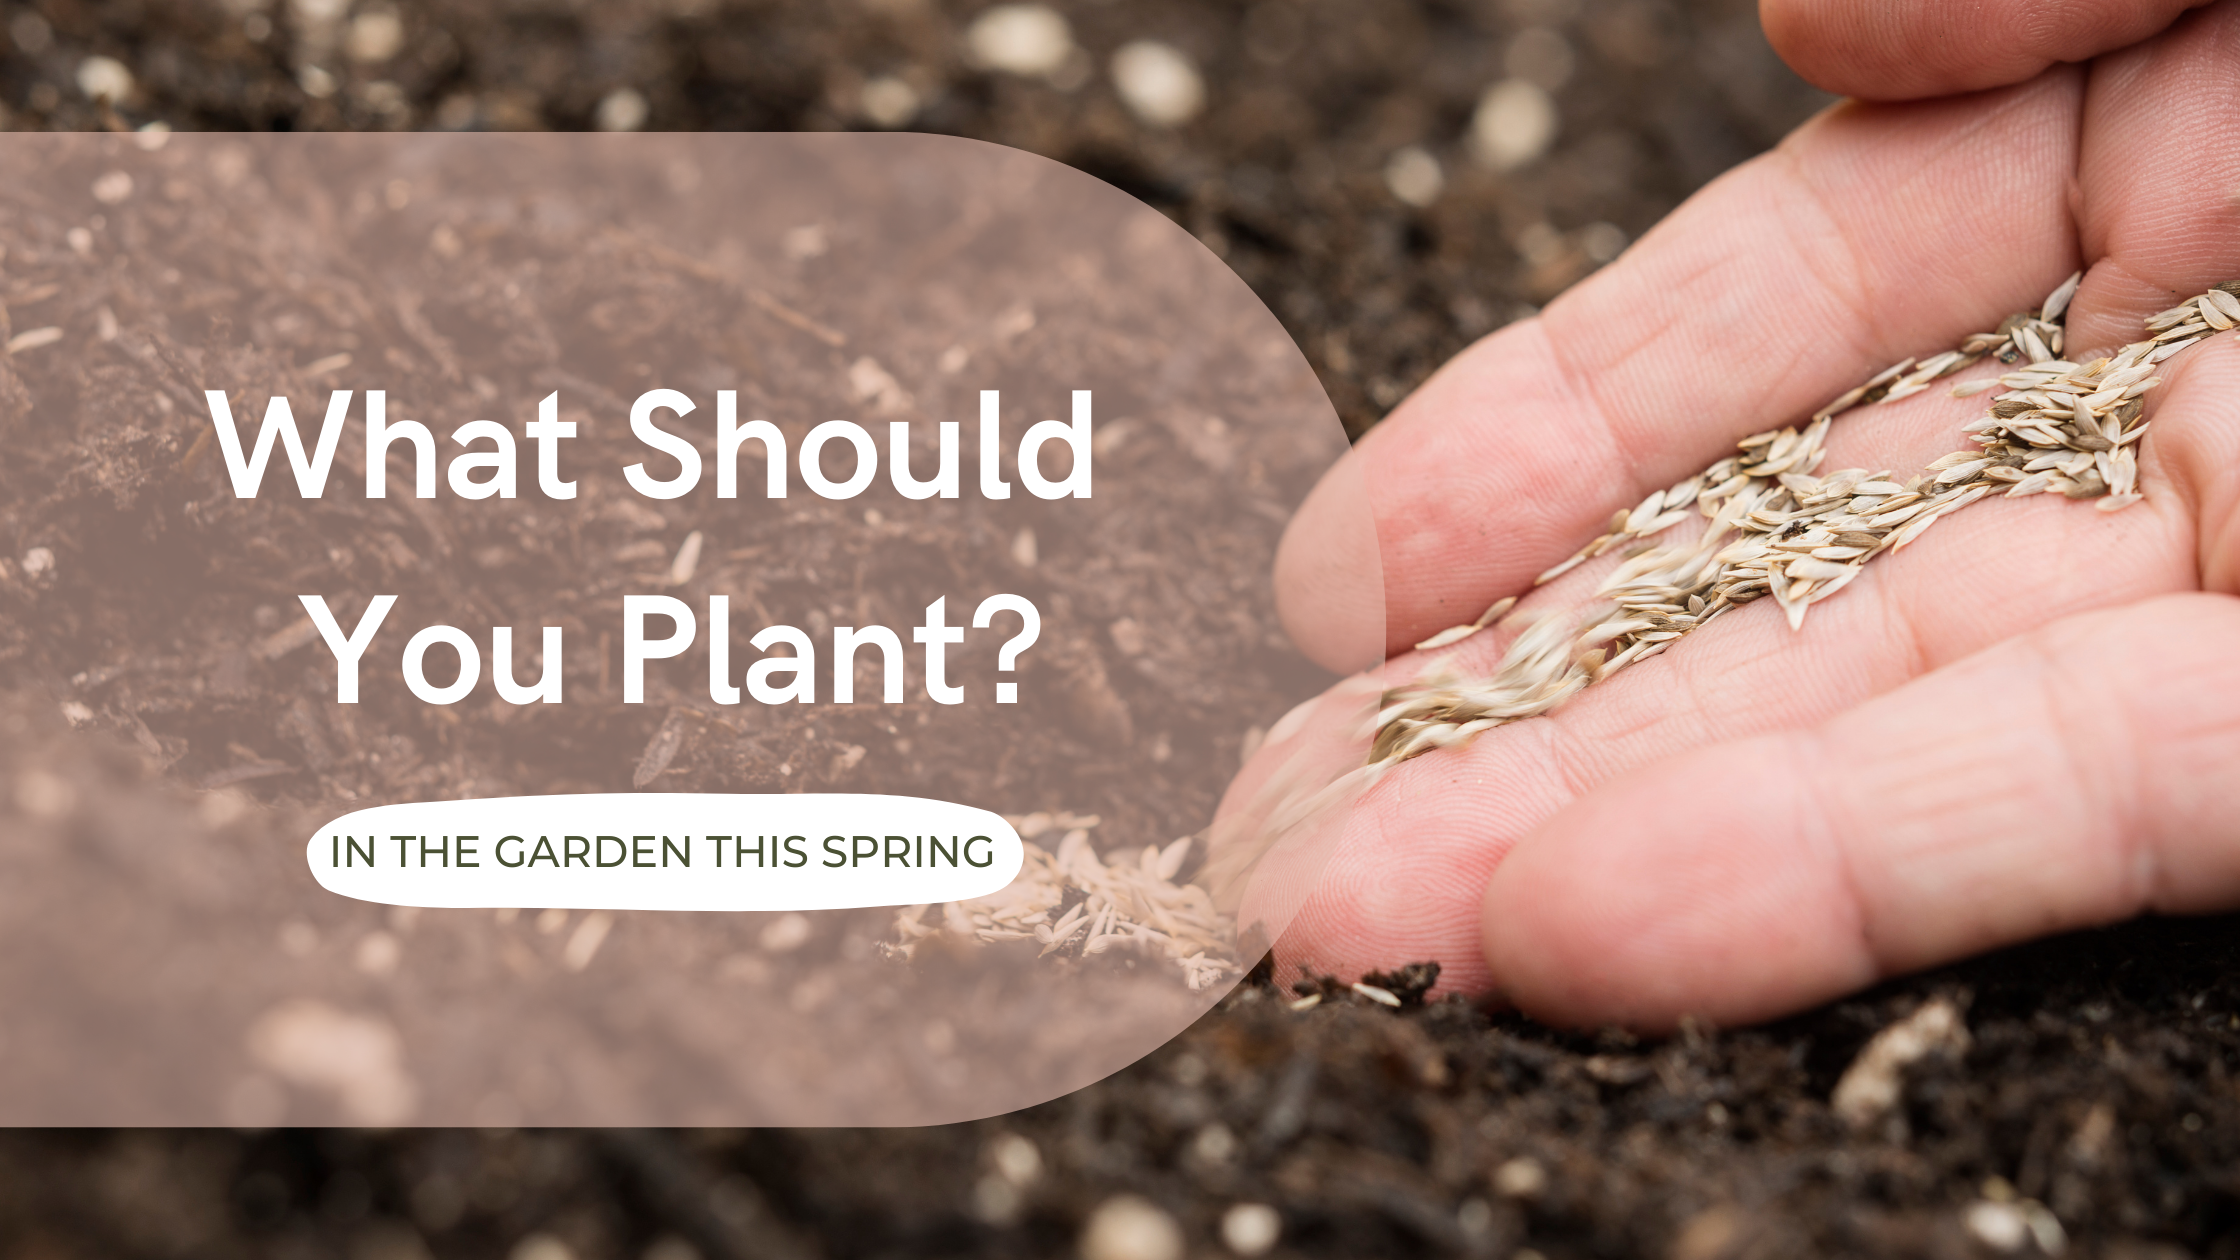 Learn how to choose what plants to grow in your garden this spring!